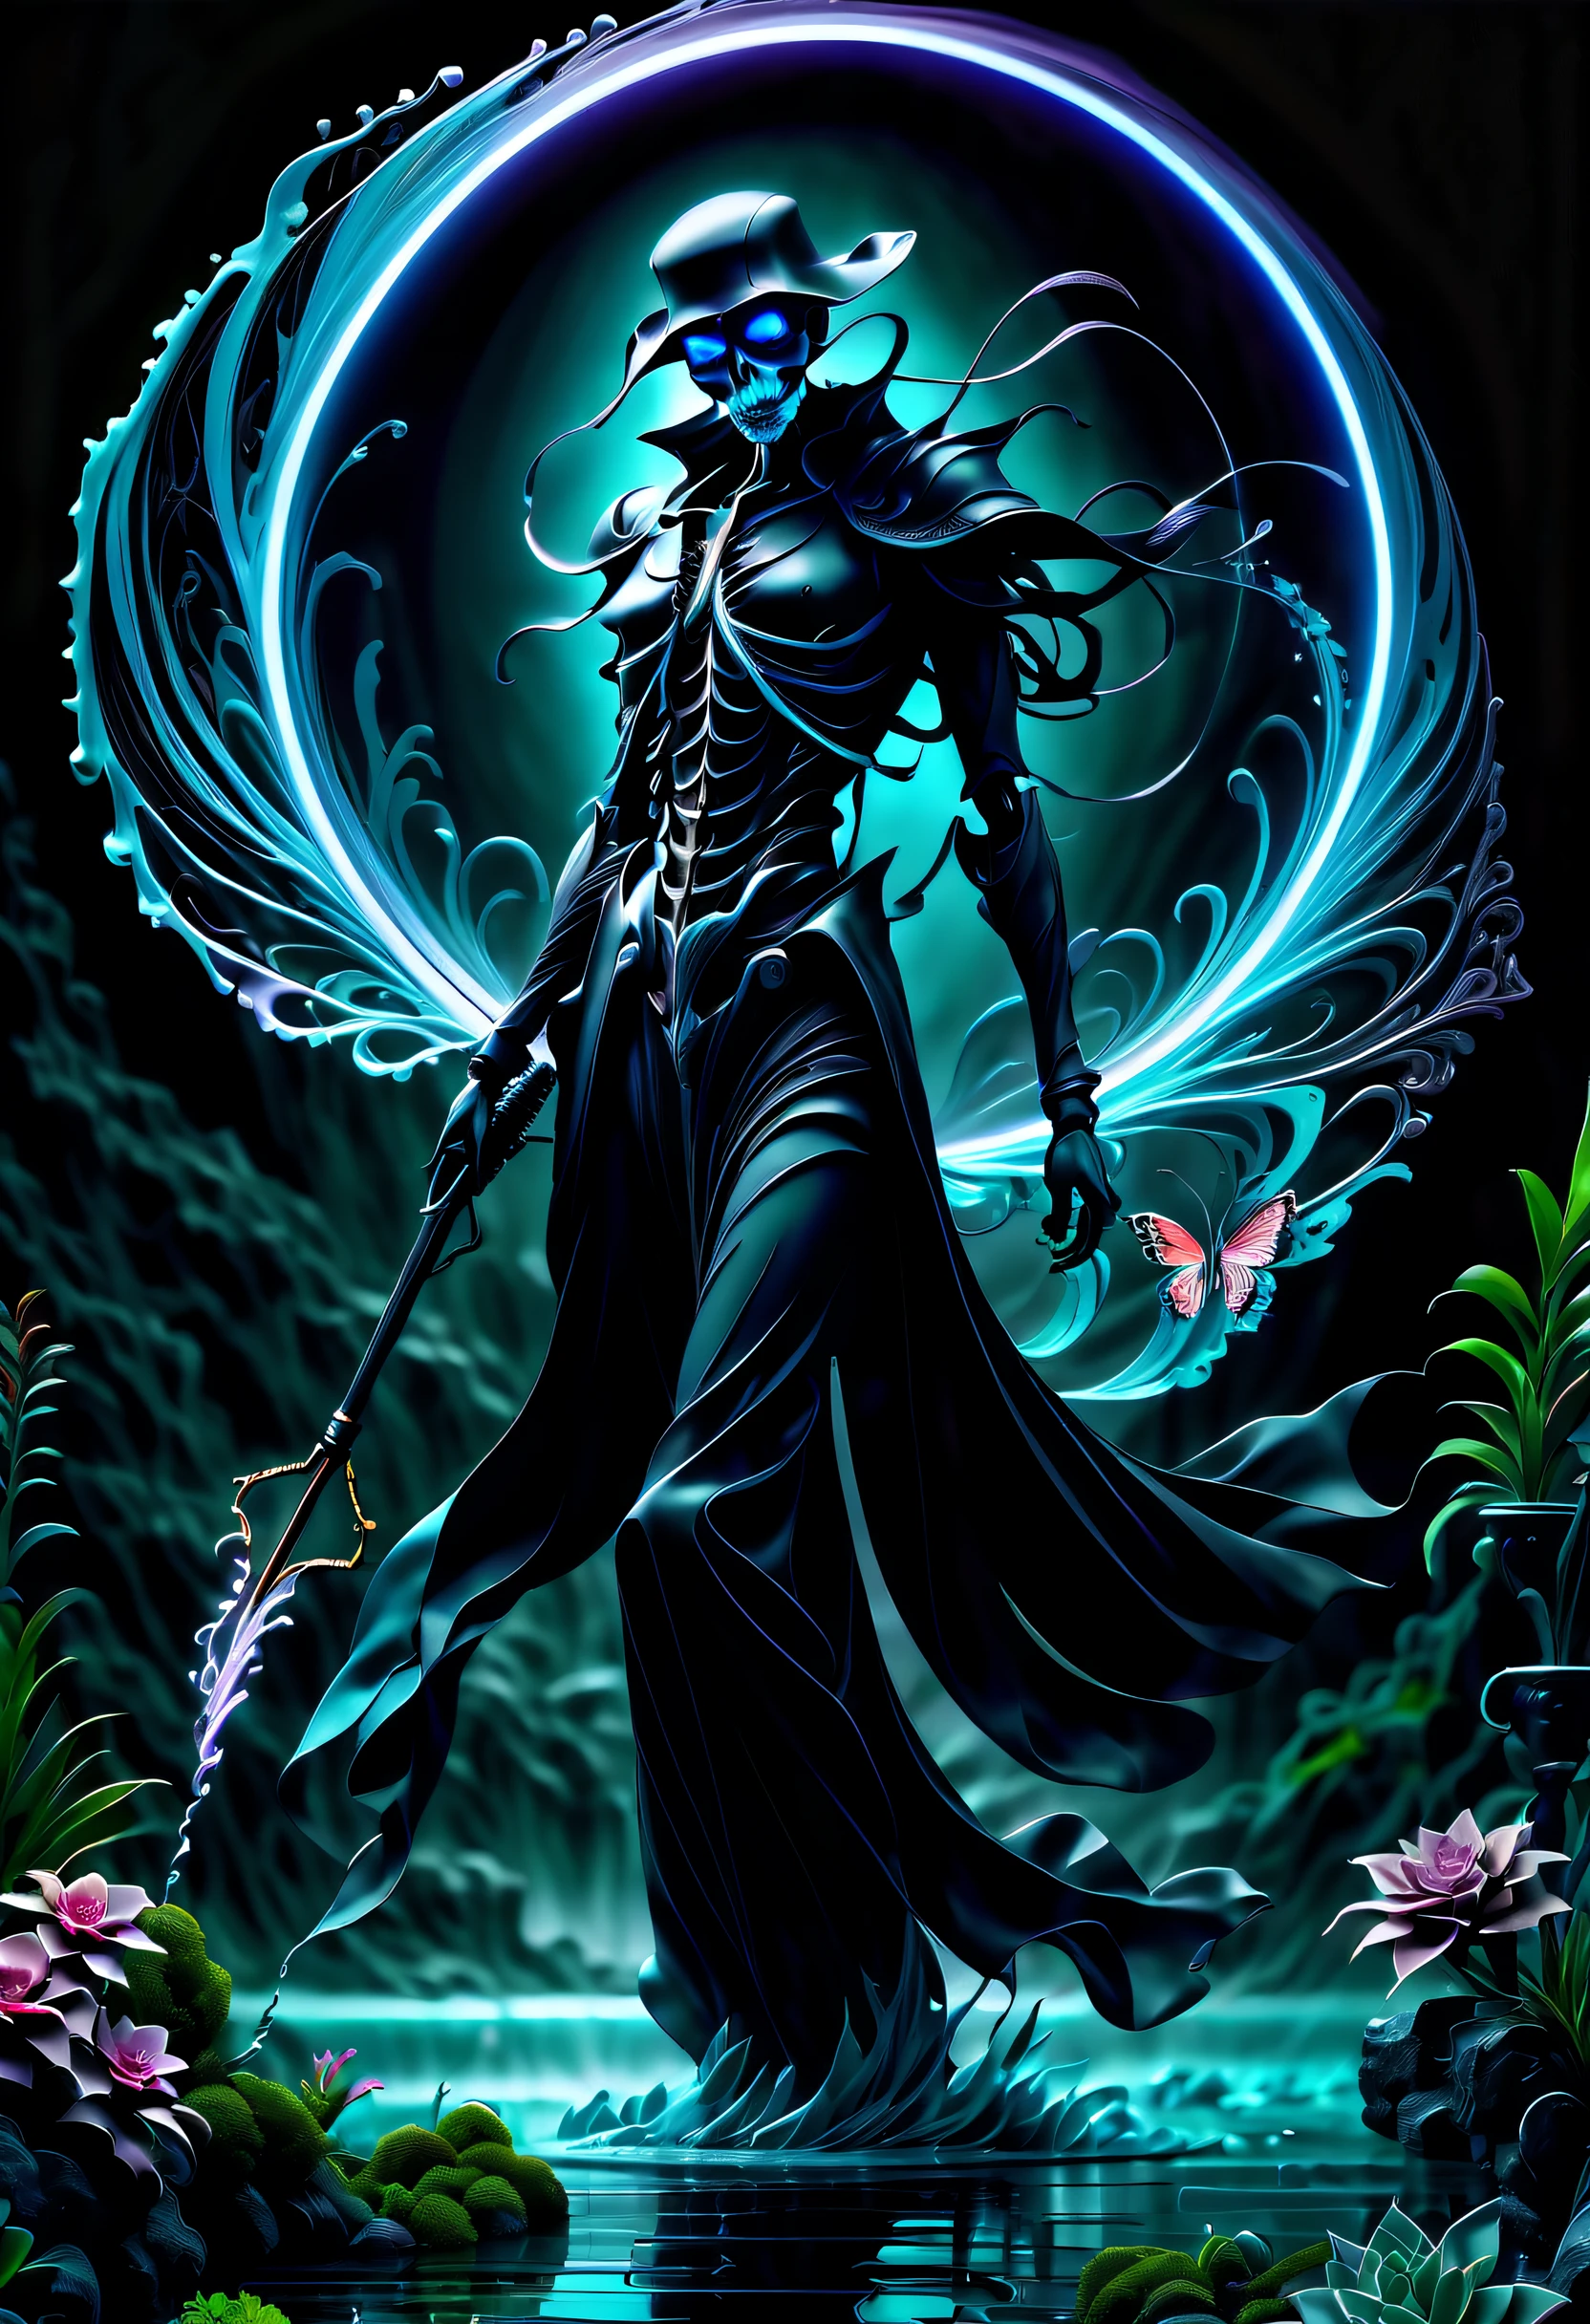 (((dark cyan black_Light painting with dazzling detail and texture art:1.3))), (((beautiful gothic horror、It&#39;s a Grim Reaper that has been holding for a long time.。_large Scythe:1.3))), (((1 piece of swallowtail butterfly with plenty of glittering scale powder:1.2))), (((To a juicy planet:1.3))), (((Seamless insane fusion design:1.4))), great atmosphere pose, (((Black_Light style with great rendering:1.4))), (((Illustration of different styles of top and bottom art:1.3))), (((Under the dark_Color_Water tornado due to upper radiation and release:1.6))), All capture beautiful details Black_light glow, (((beautiful detail black_light_Shine and dim glow behind:1.3))), Mysterious beauty, elegant twist, Swirls and sparkling glass, Dim lighting, (((high contrast resolution:1.1))), (((Delicate touch:1.5))), (((pop splash succulent neon_Hazy glow_garden background details:1.1))), (((Intricate details:1.3))), (((fantasy fairy illustration:1.2))), matte paint, mezzotint, detailed gouache painting, heavy stroke mix, ((Eternity and dark fantasy wishes:1.1)), (((Exquisitely clear details:1.4))), (((true masterpiece:1.4))), UHD drawing,